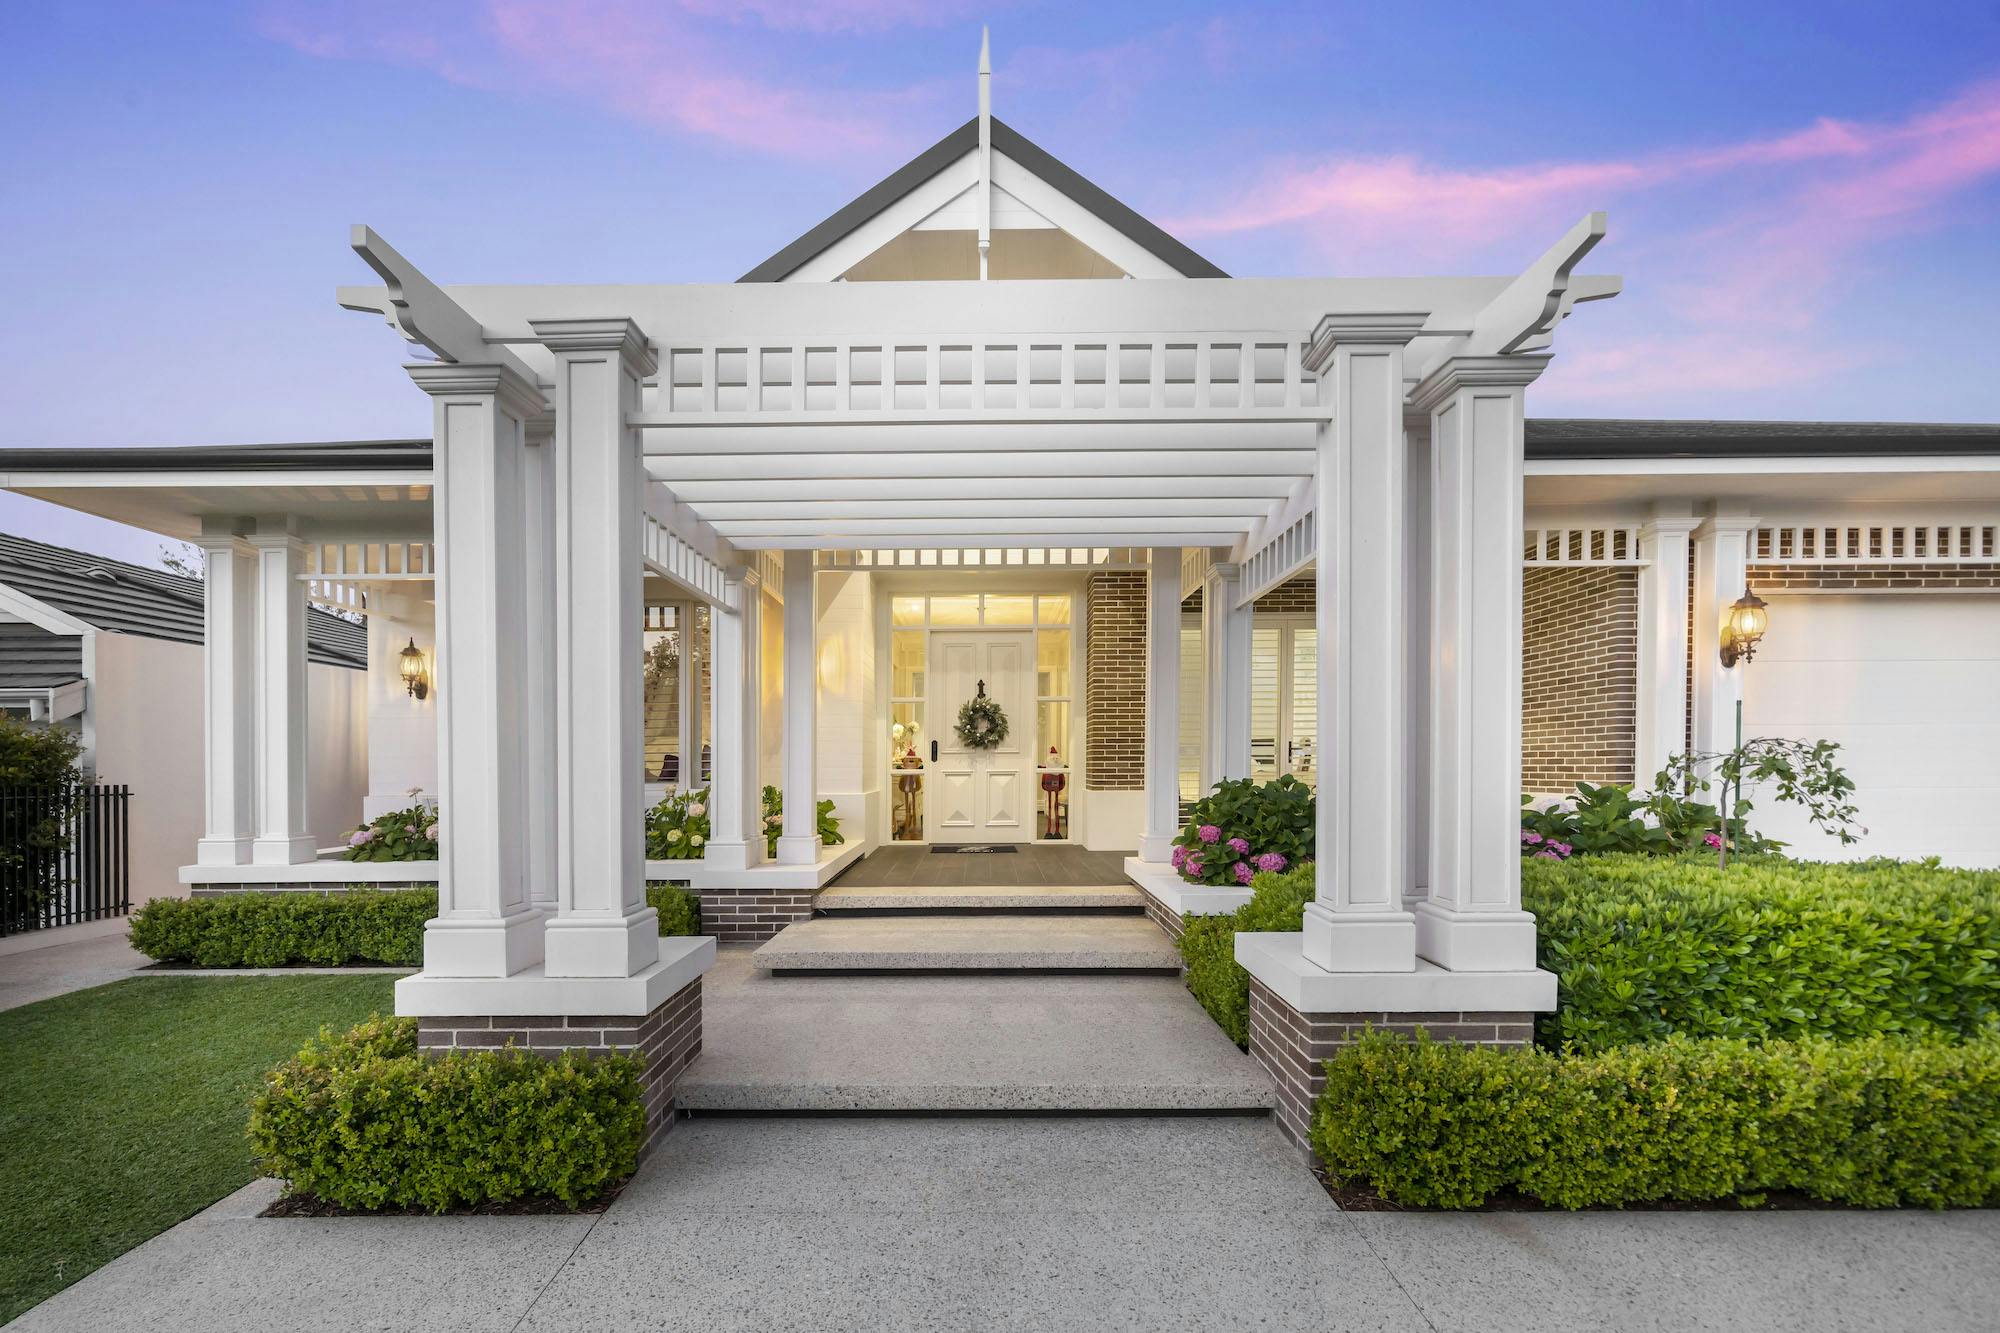 This Luxurious Nedlands Residence Has Just Gone On The Market, Duet Property